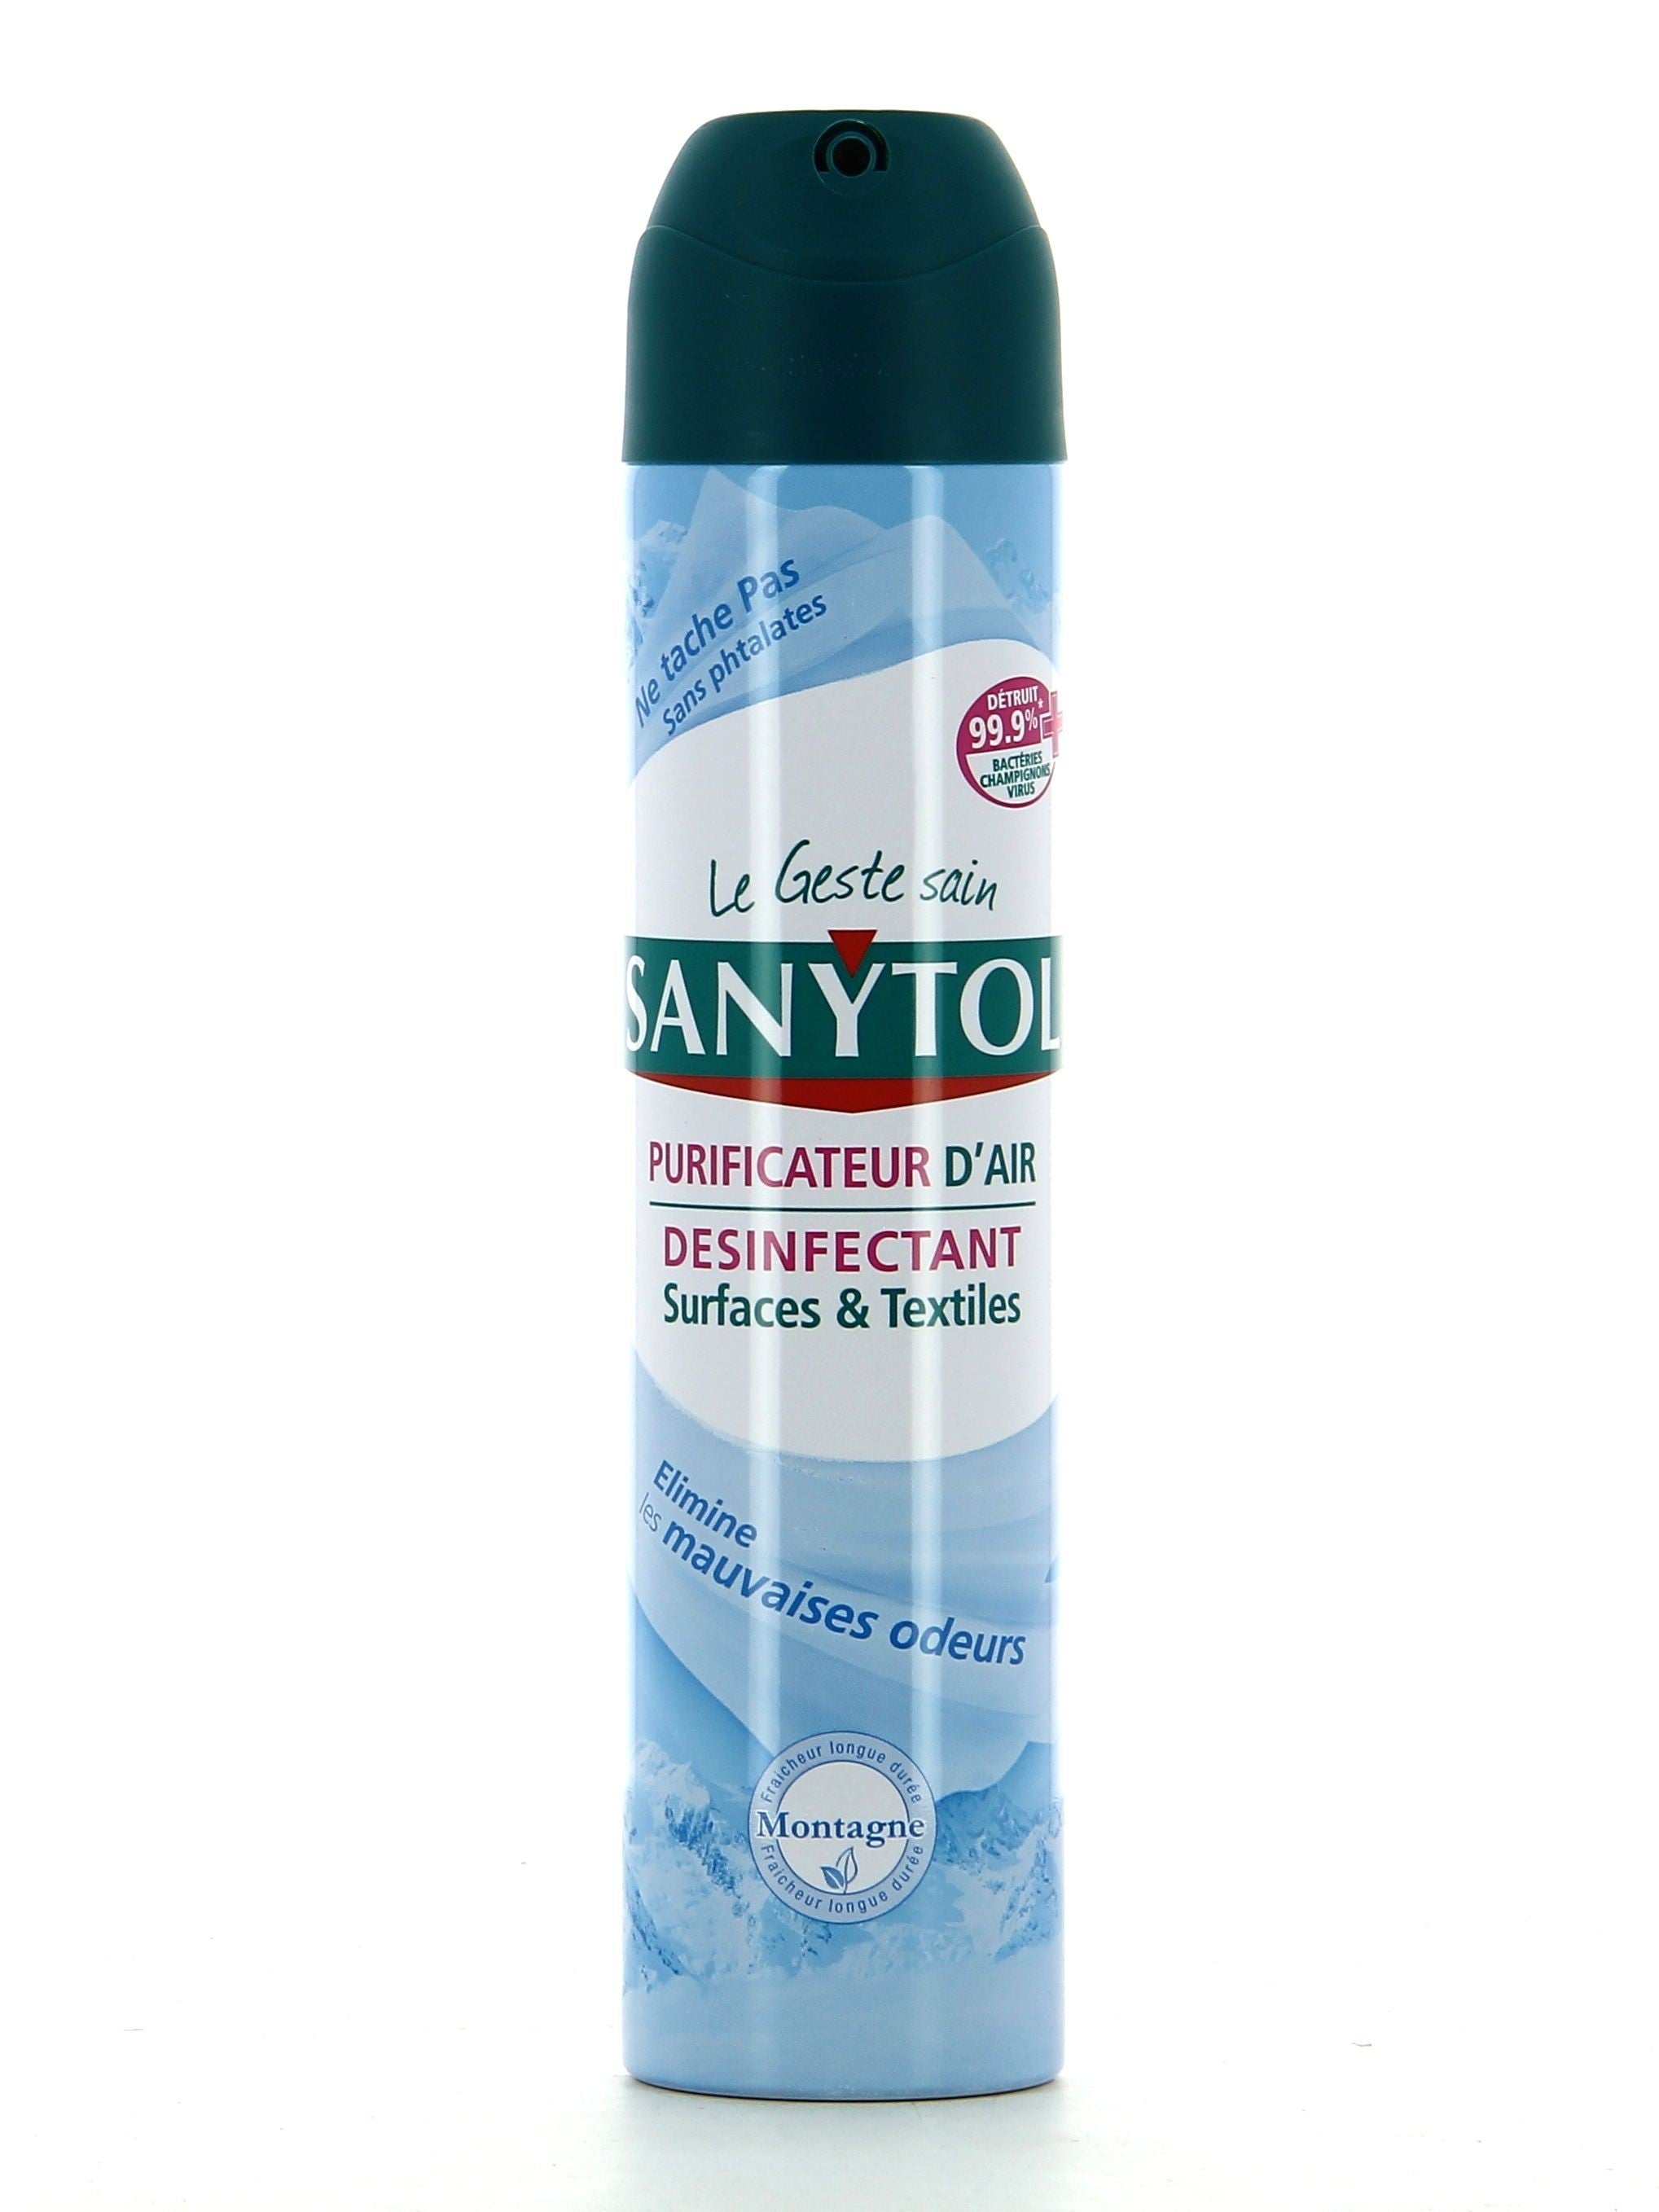 Disinfectant Surfaces and Textiles Mountain Freshness Sanytol